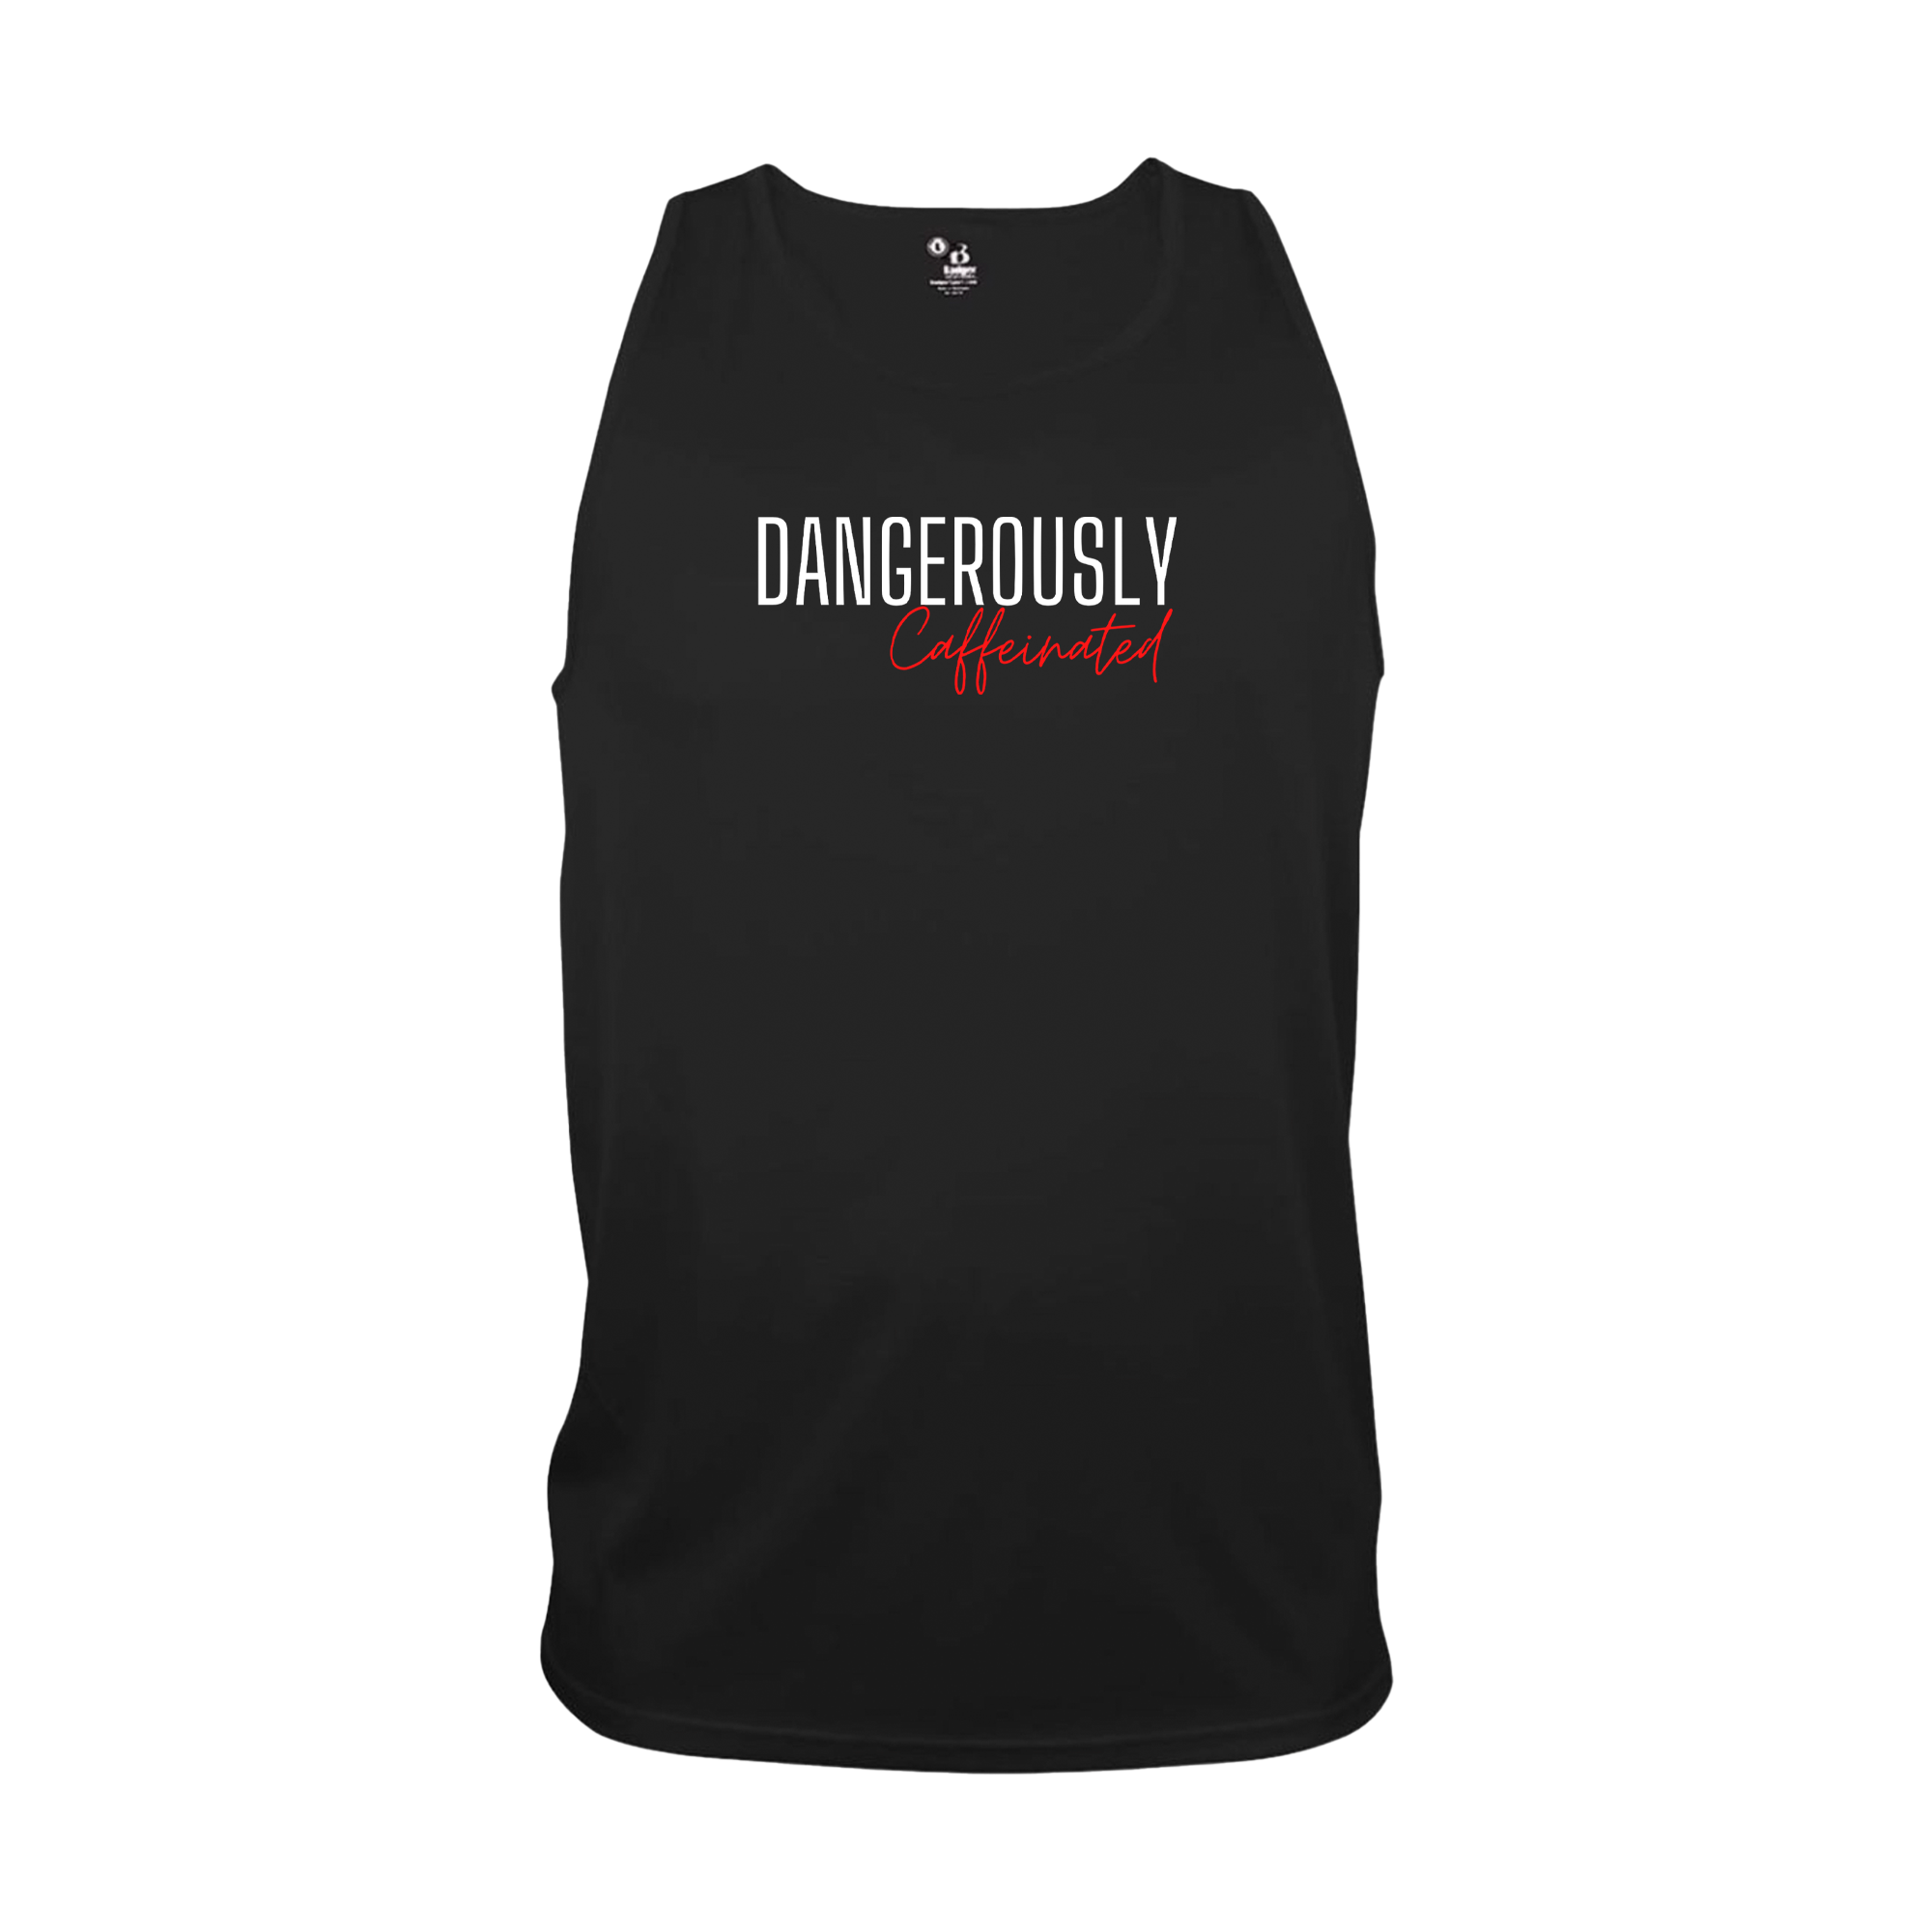 Kevin Cooney - Dangerously Caffeinated Men's Athletic Tank Top (Black)